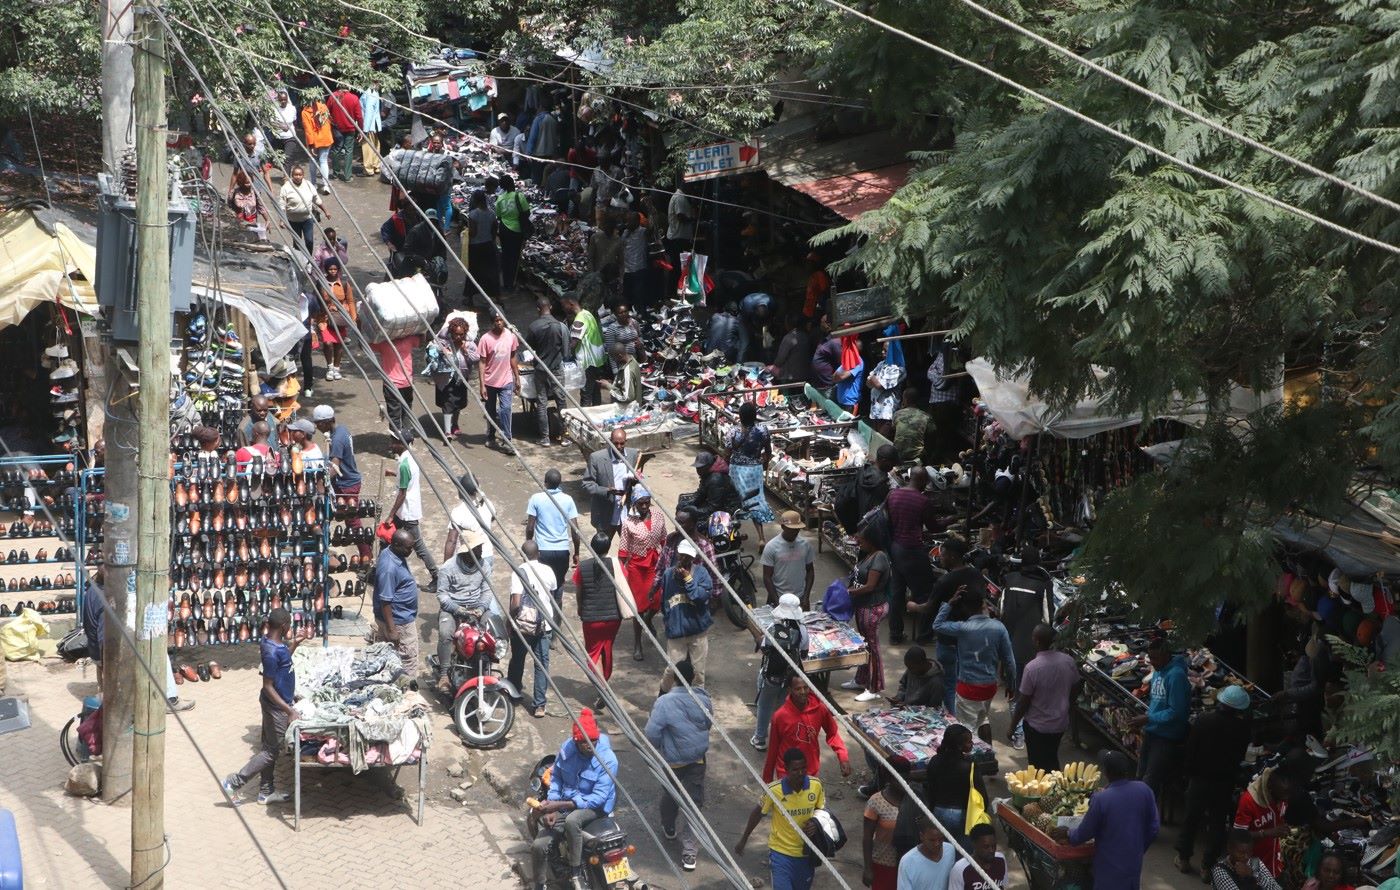 The history of Nairobi’s Gikomba market and its perennial mysterious fires